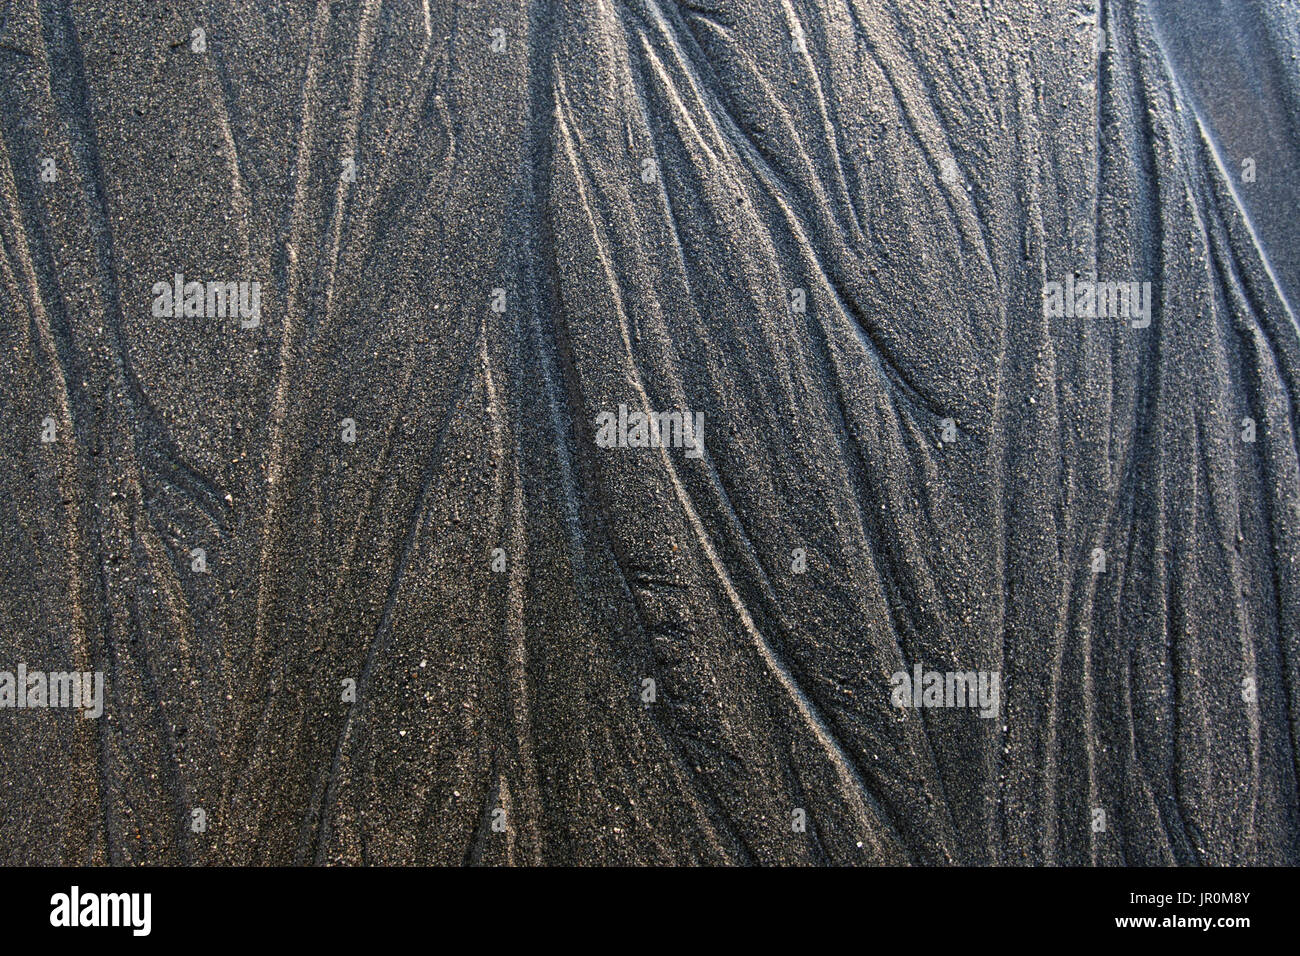 Extreme Close-Up Of Unique Patterns Of Lines On The Surface Of The Wet Sand On The Tidal Flats; Alaska, United States Of America Stock Photo